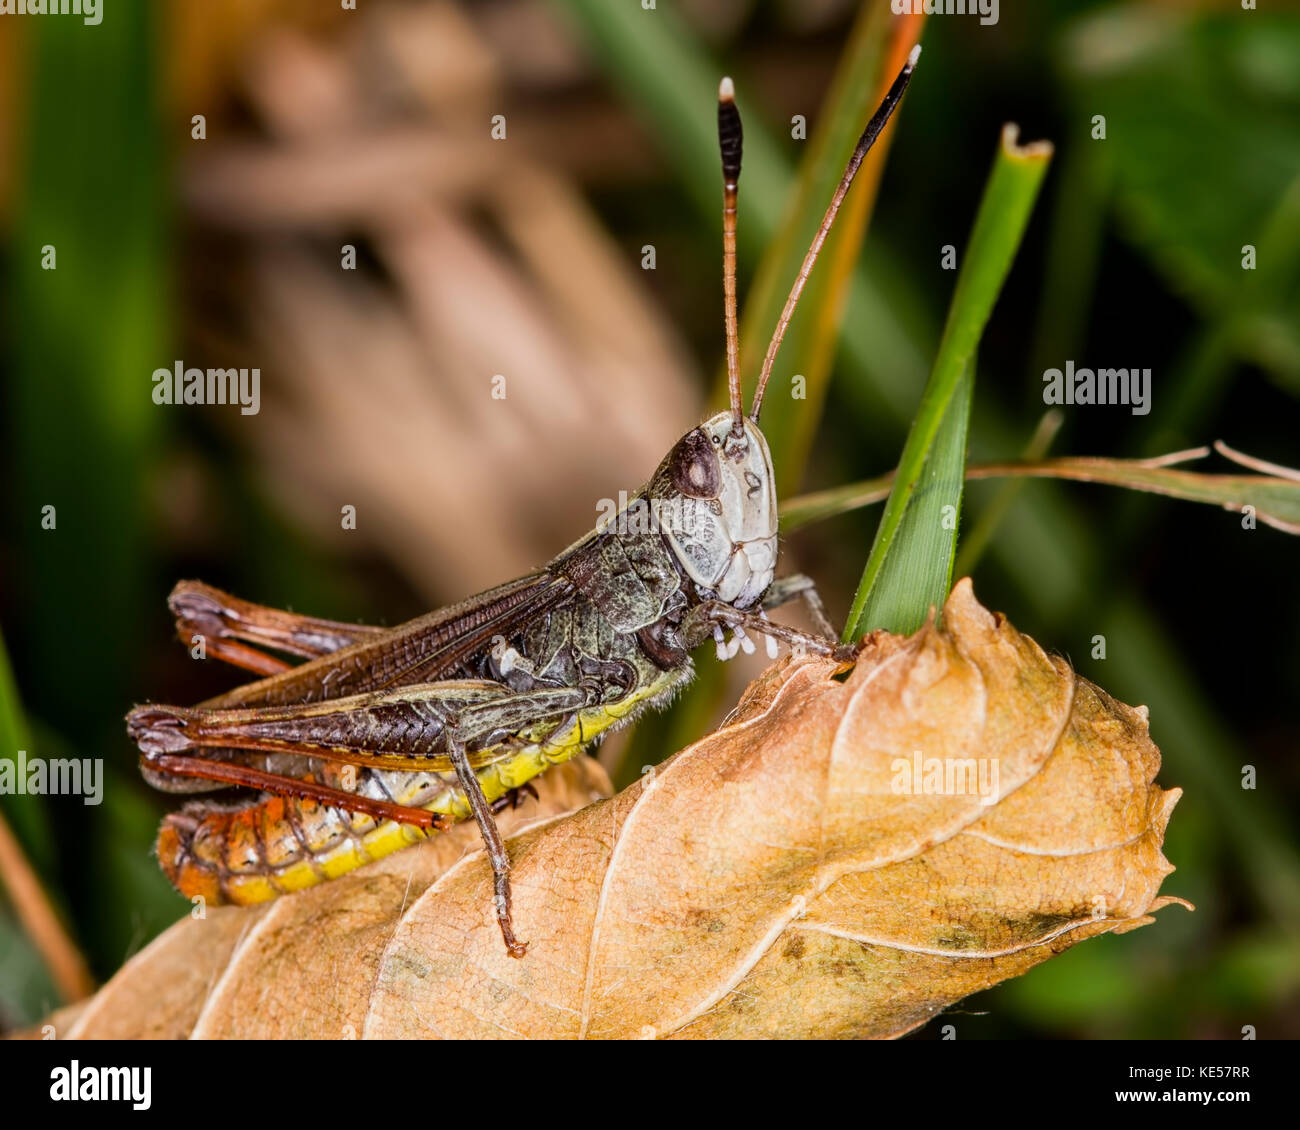 A beautiful and brightly colored grasshopper is enjoying its Indian summer days. Stock Photo